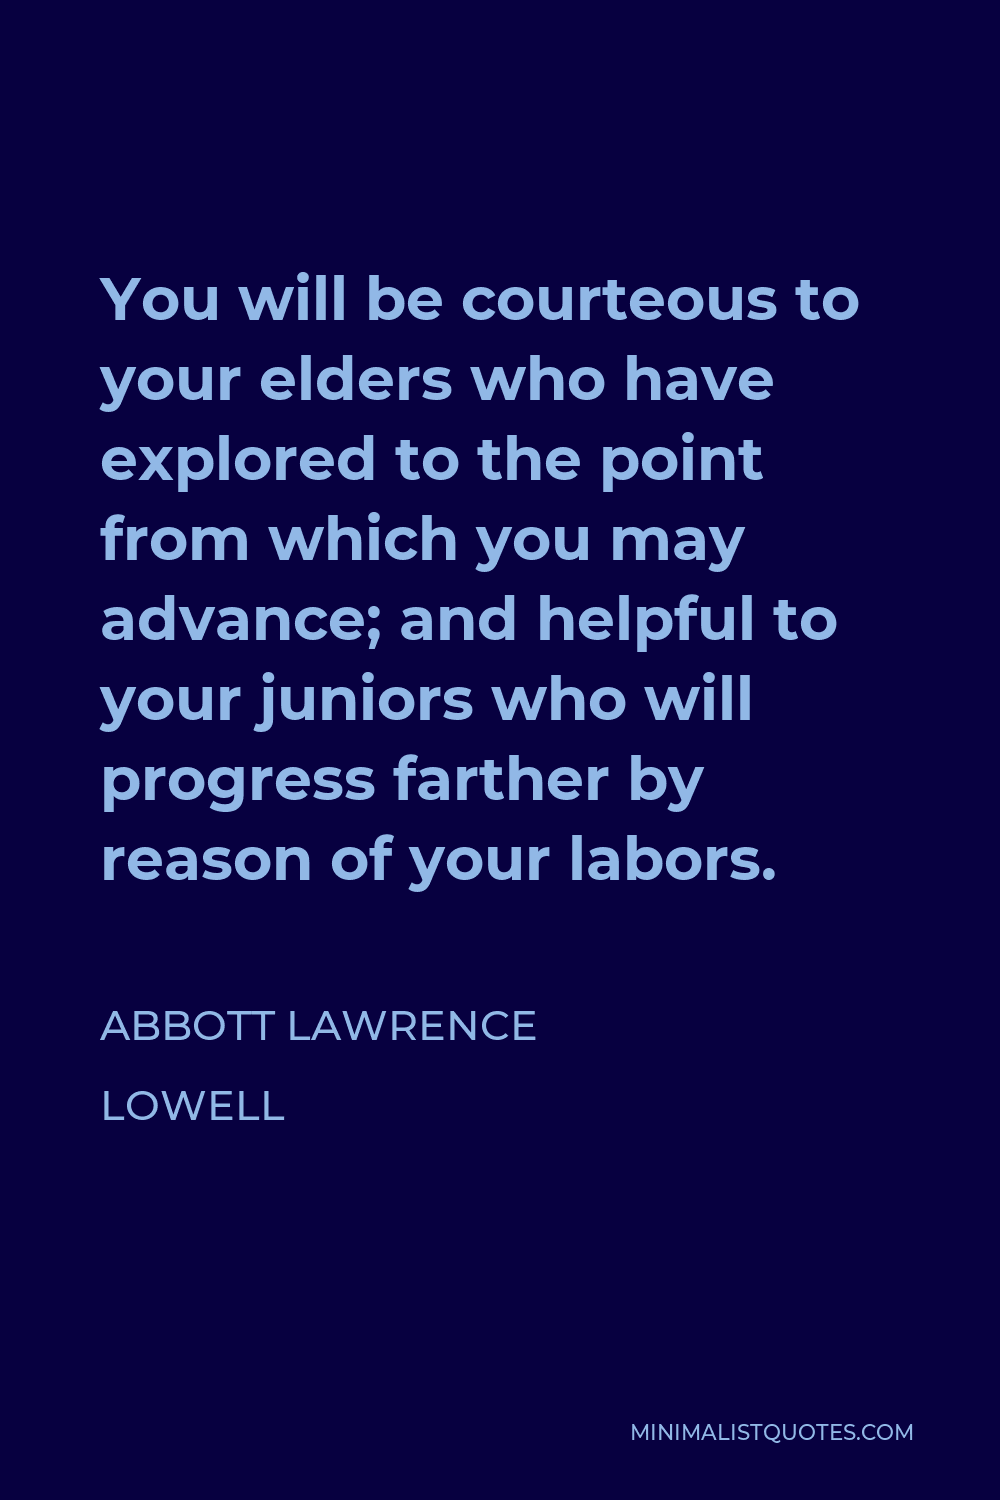 Abbott Lawrence Lowell Quote - You will be courteous to your elders who have explored to the point from which you may advance; and helpful to your juniors who will progress farther by reason of your labors.